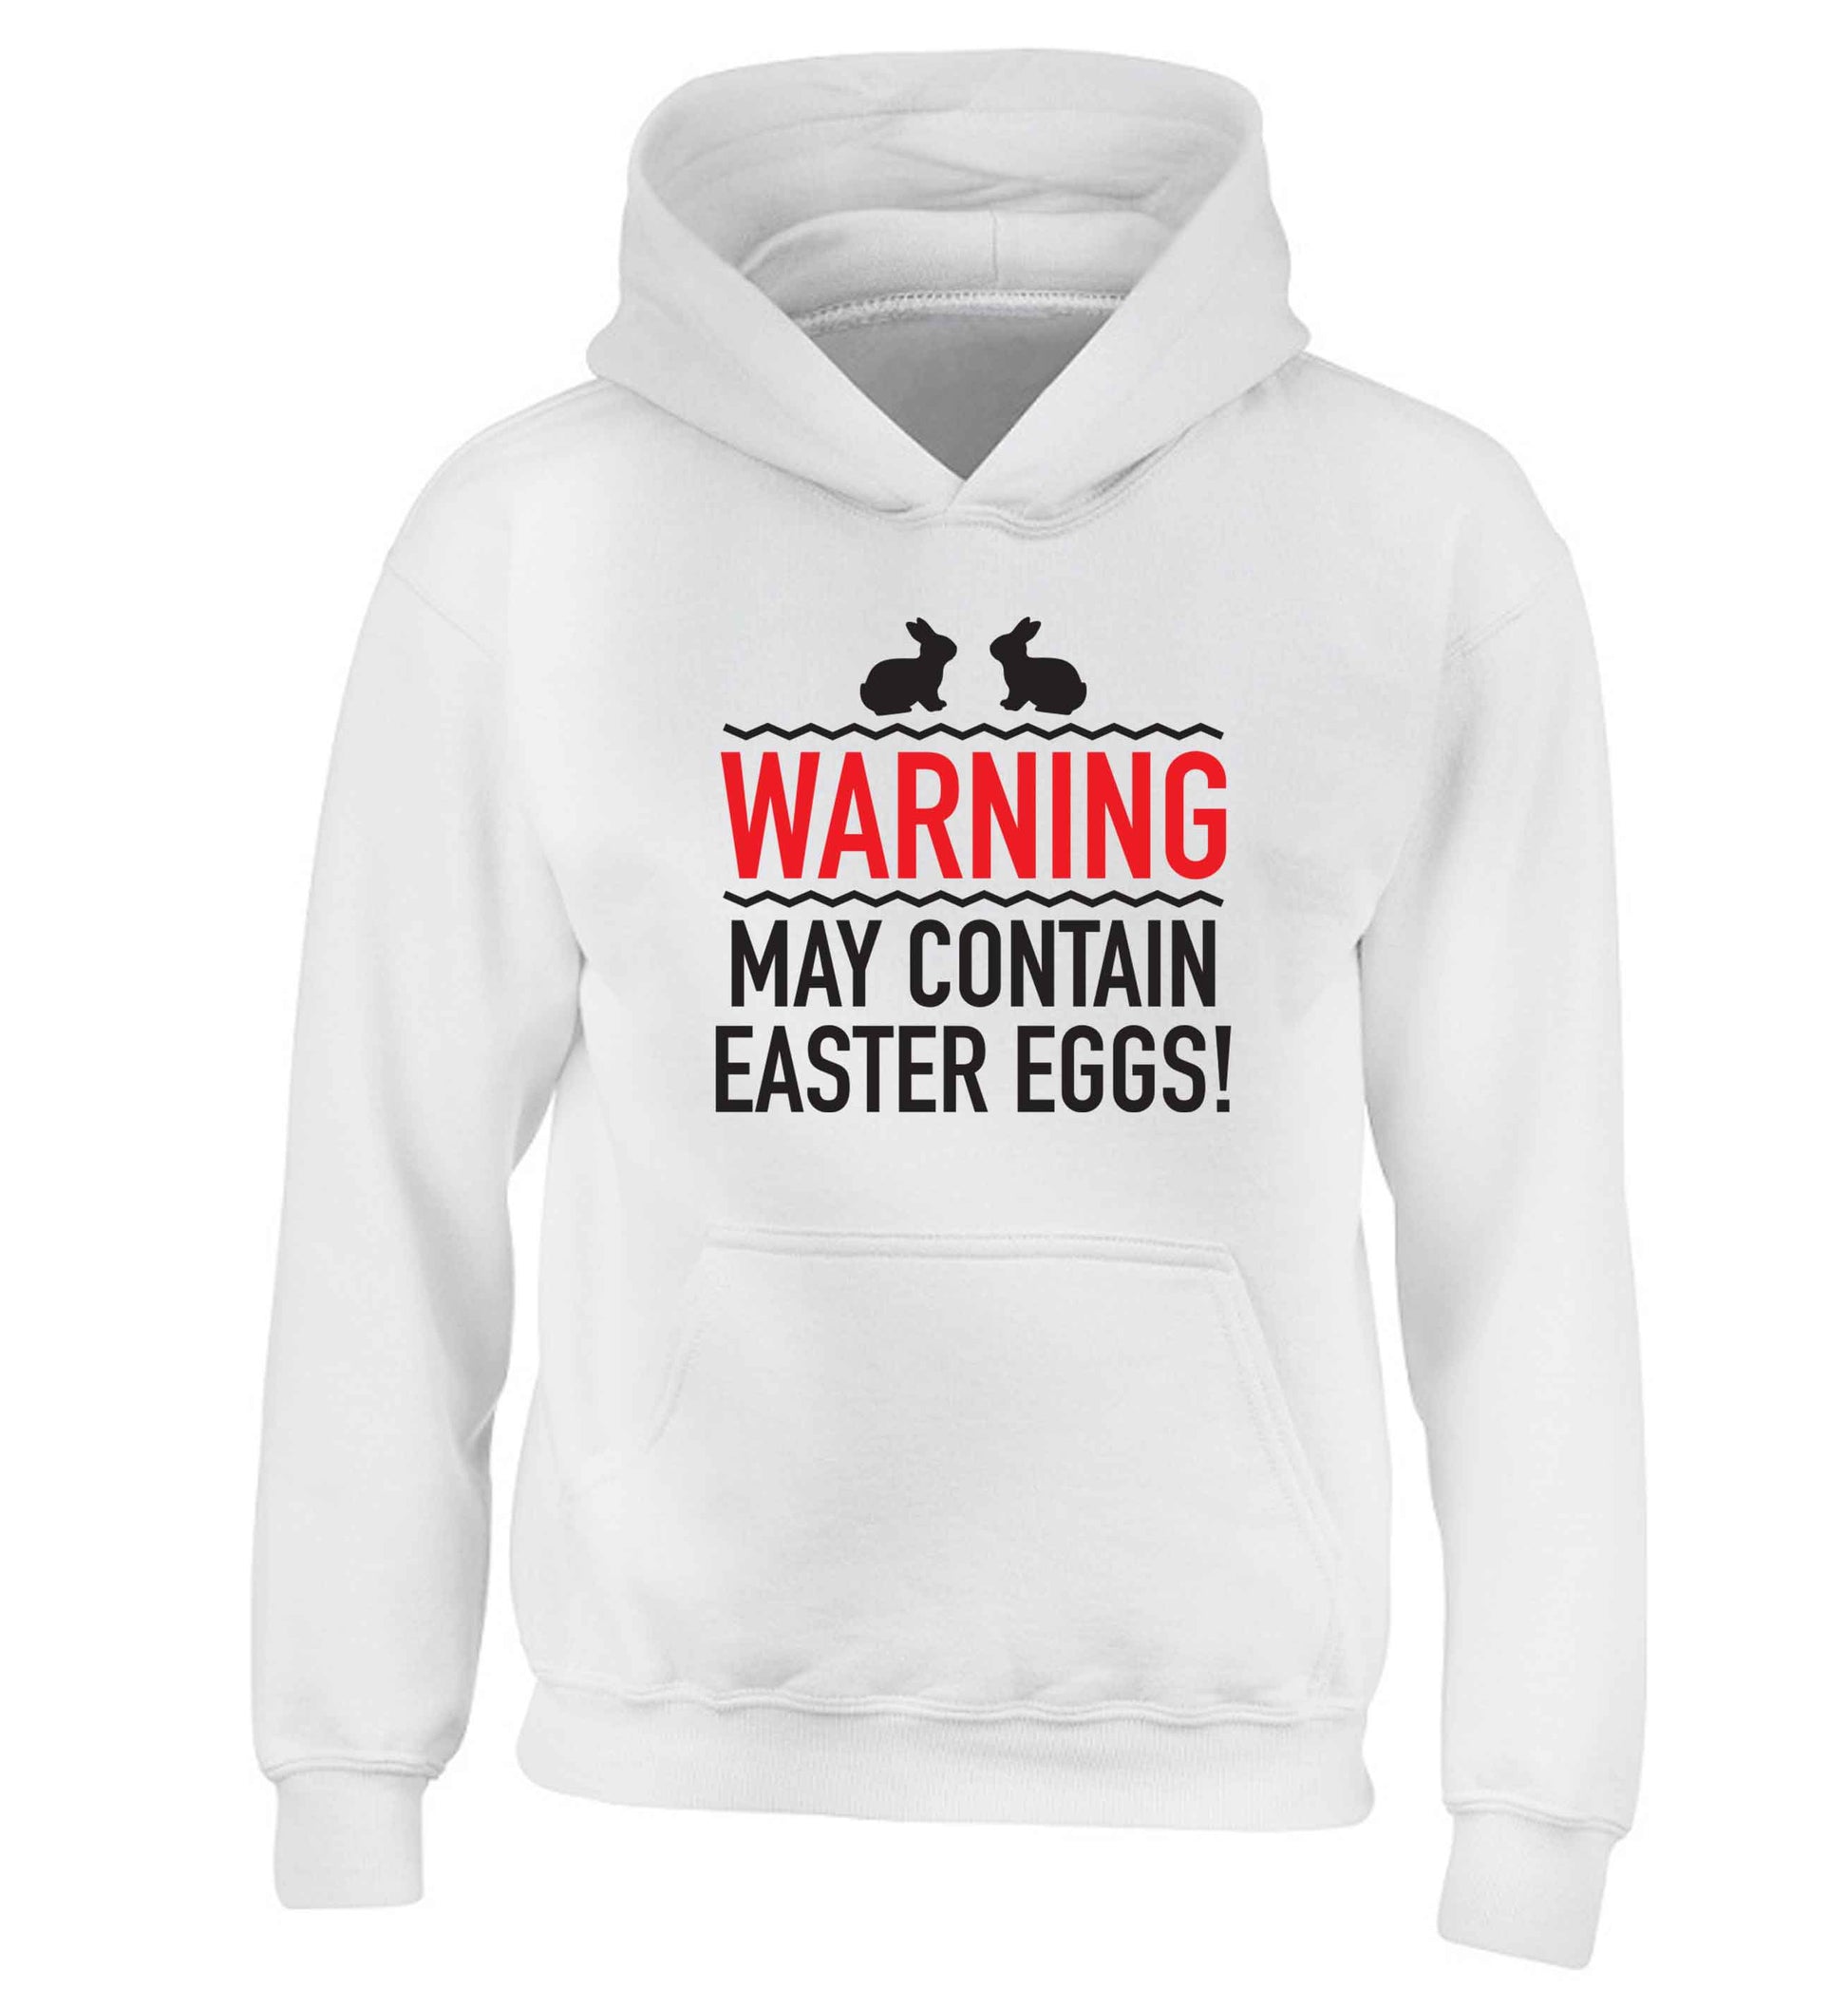 Warning may contain Easter eggs children's white hoodie 12-13 Years